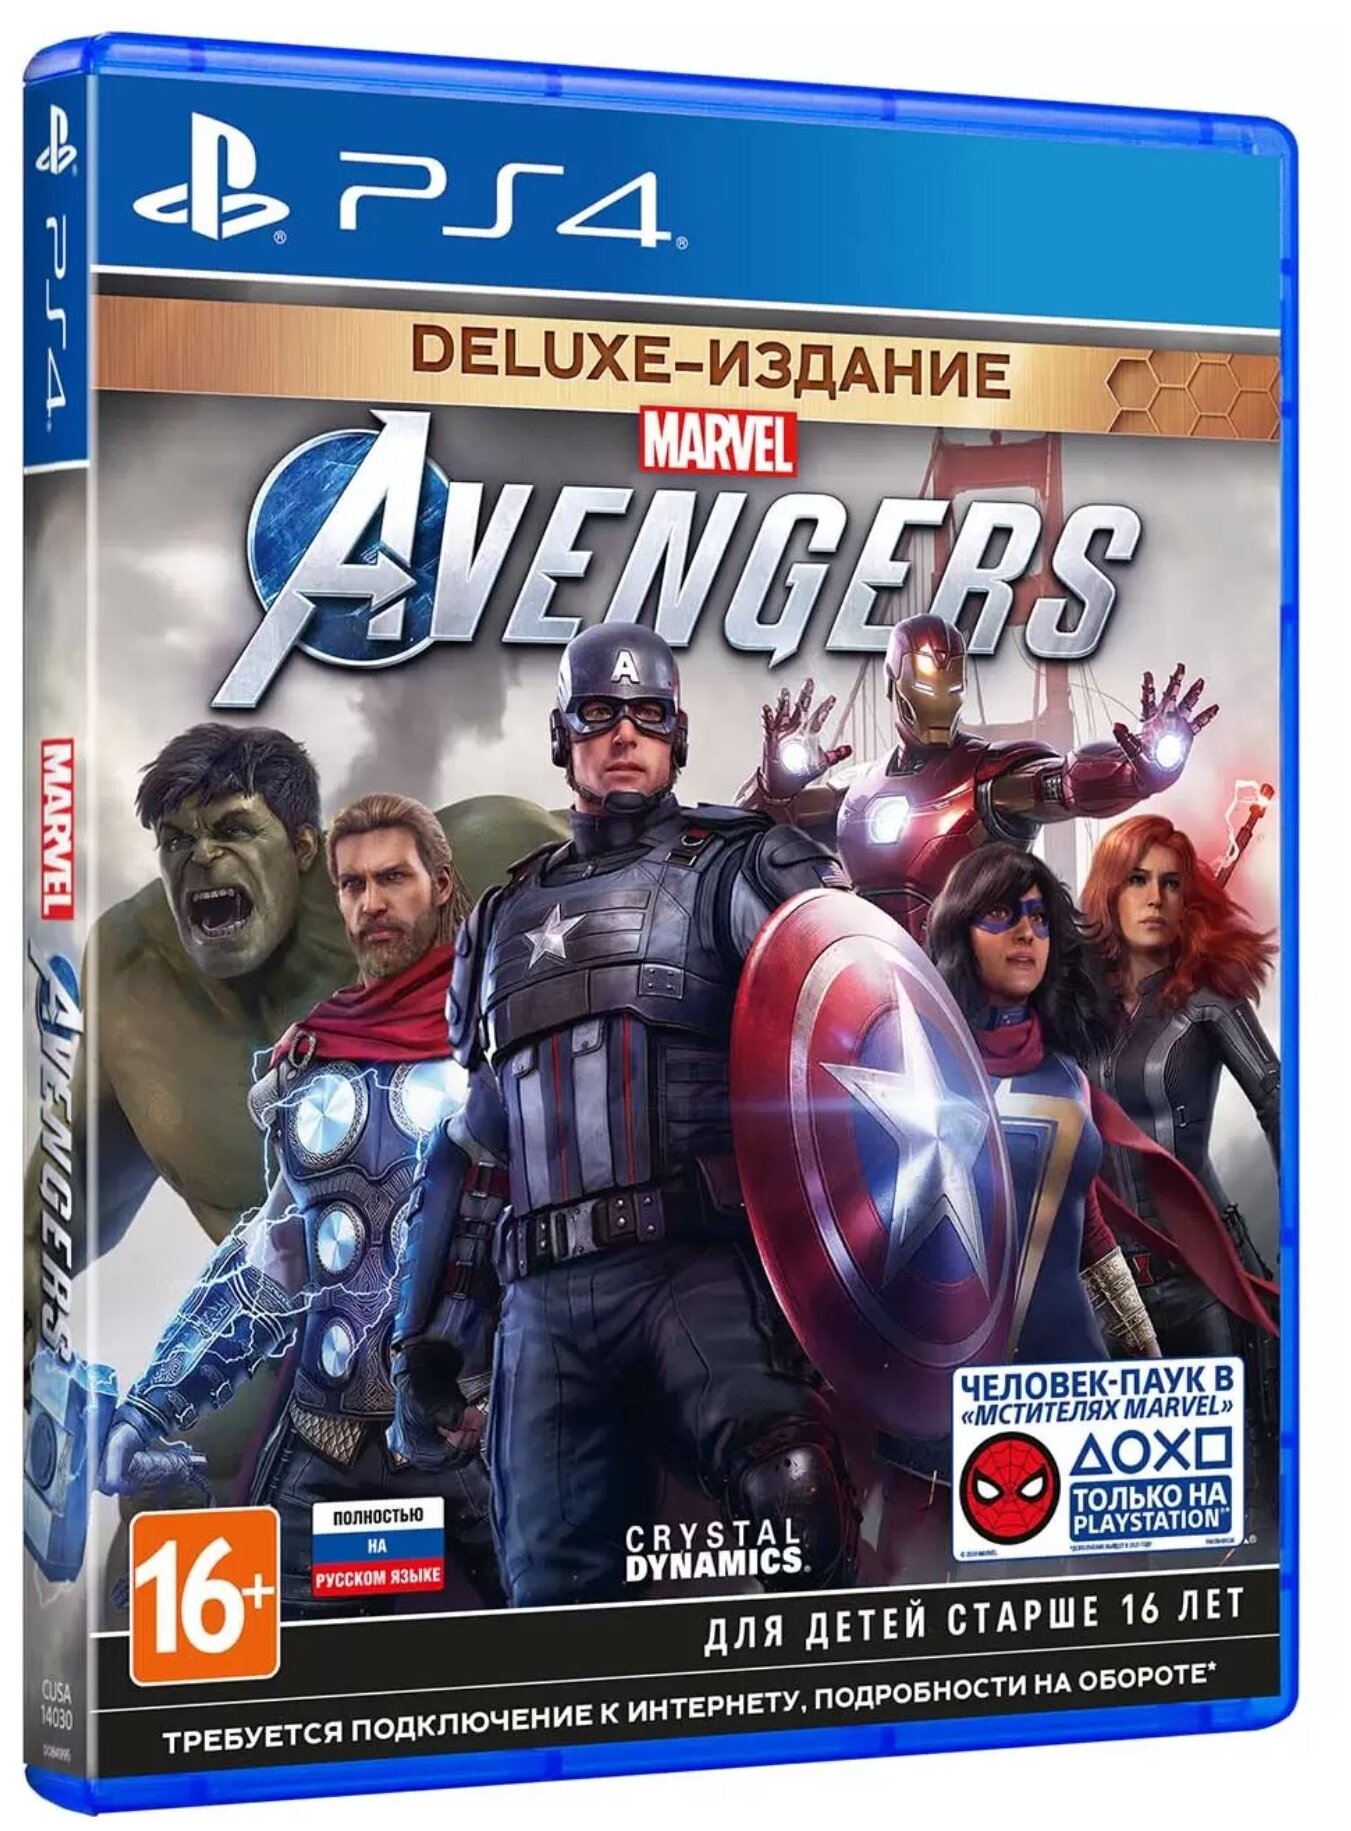  Marvel (Avengers) Deluxe Edition   (PS4)